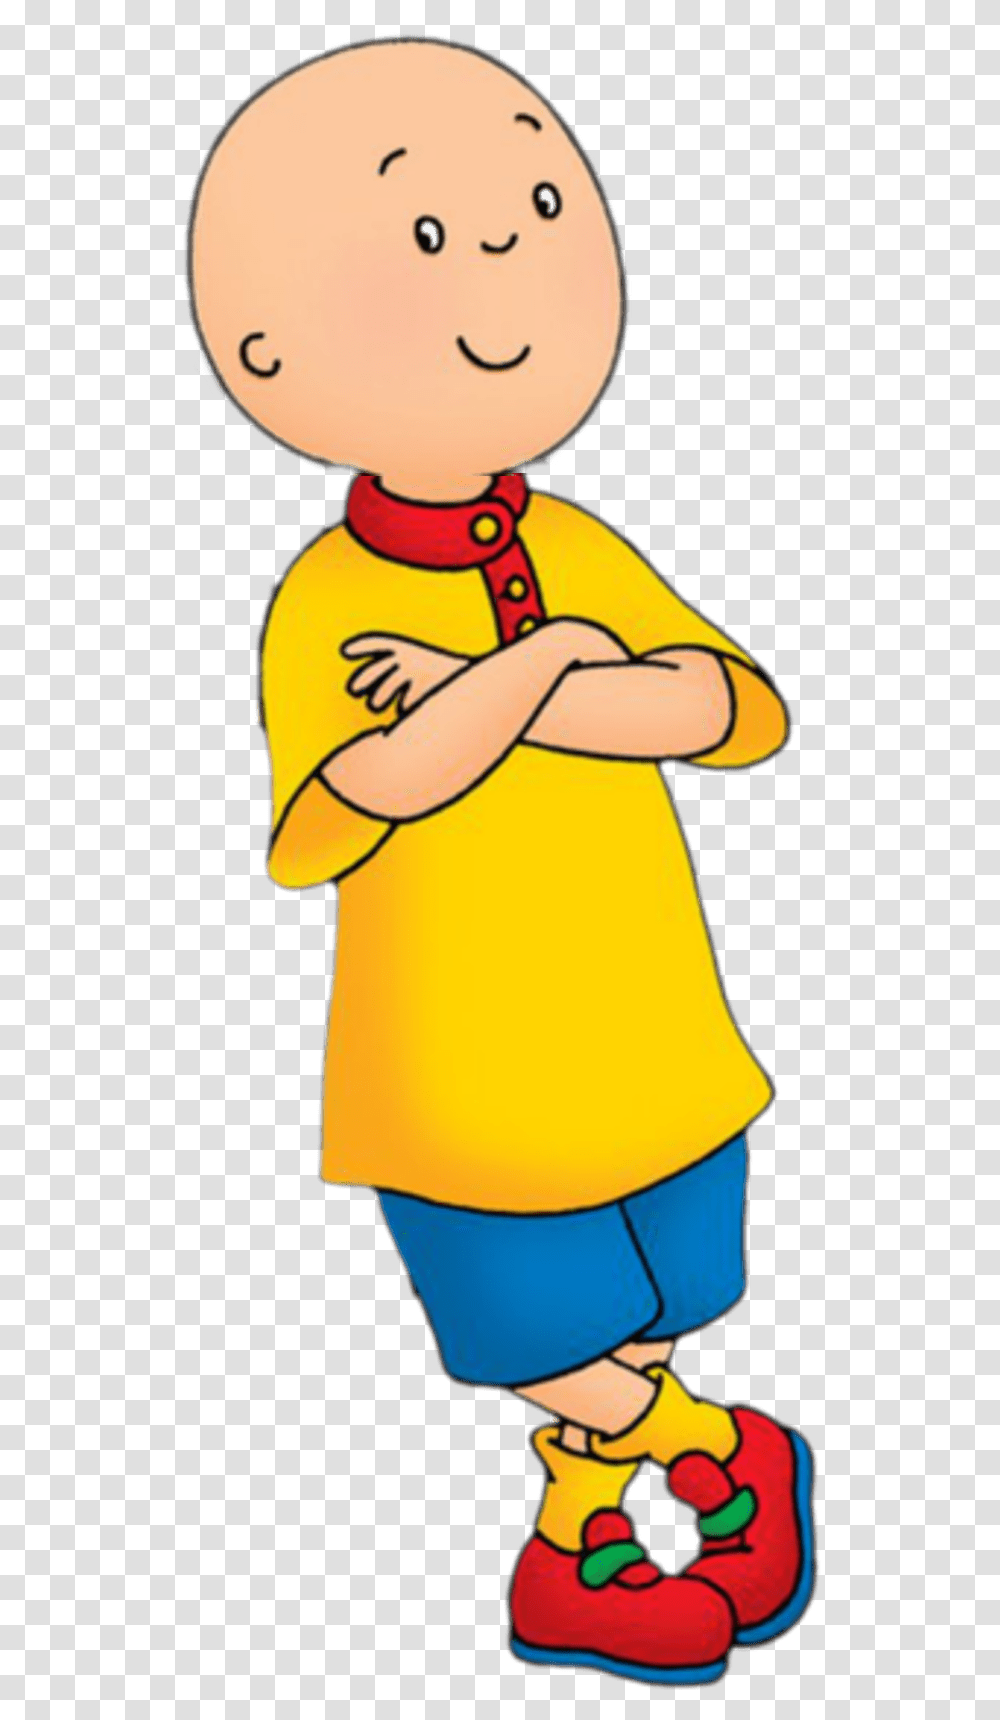 Cartoon Character Caillou Download Caillou With A Friend, Person, Hat, Outdoors Transparent Png